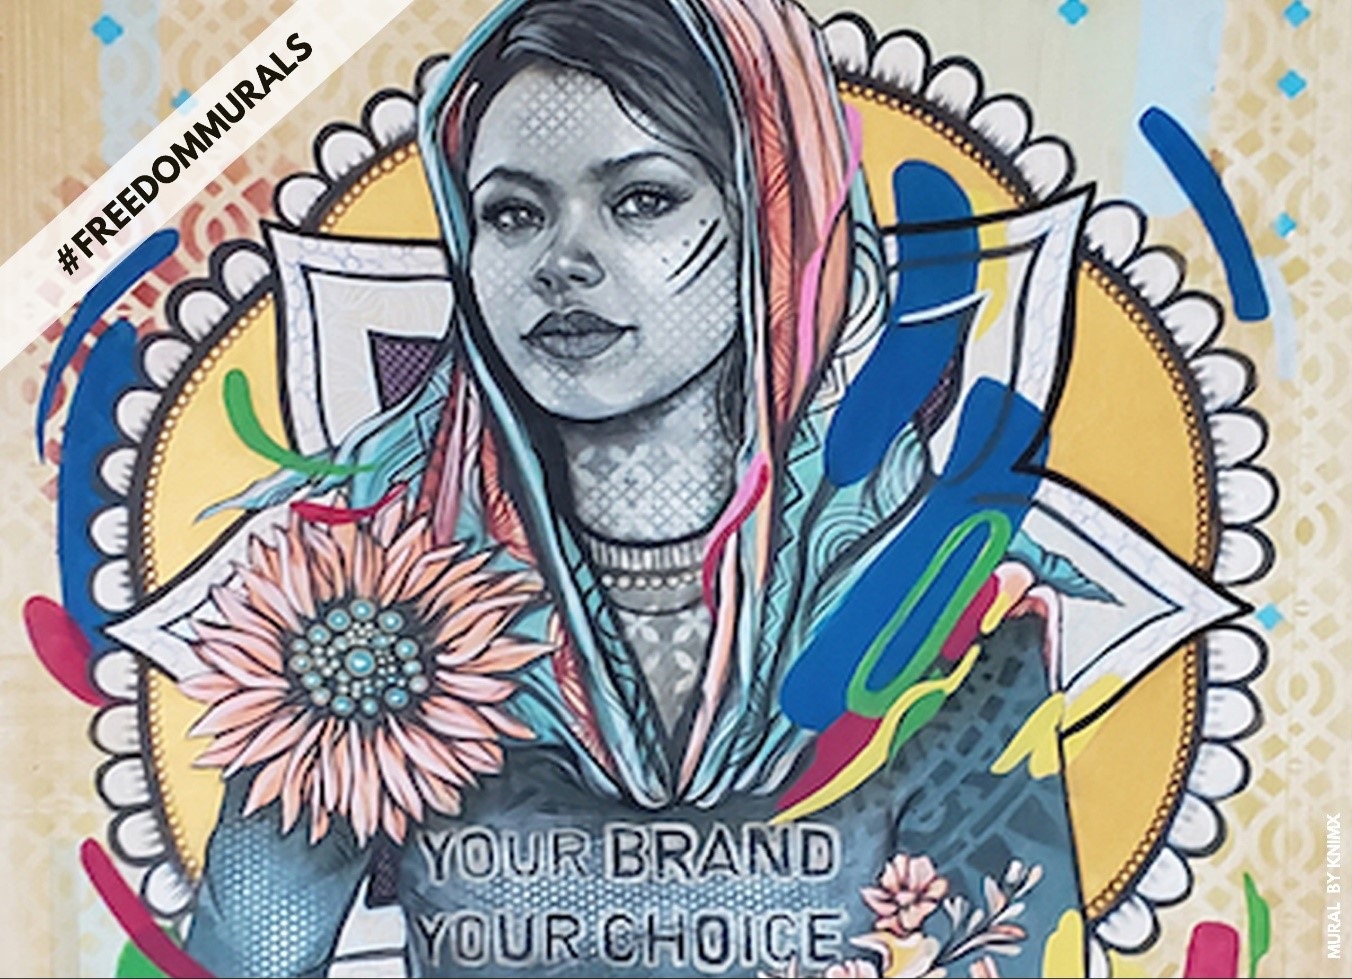 Drawing of a girl with #freedommurals and Your Brand Your Choice written on it